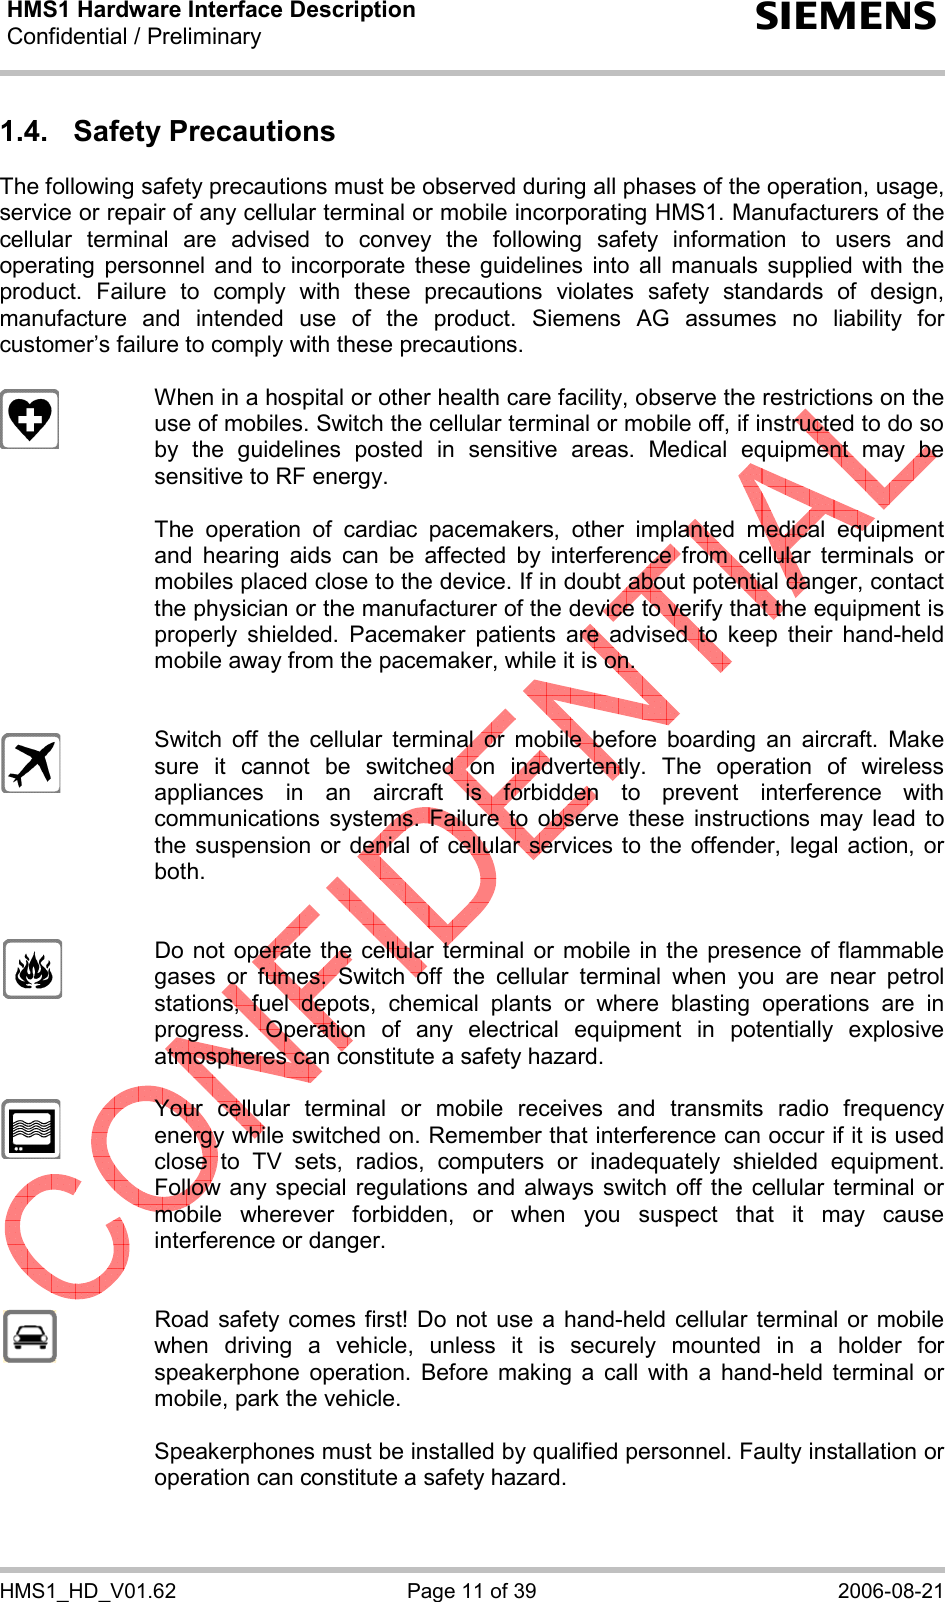 HMS1 Hardware Interface Description Confidential / Preliminary  s HMS1_HD_V01.62  Page 11 of 39  2006-08-21 1.4. Safety Precautions The following safety precautions must be observed during all phases of the operation, usage, service or repair of any cellular terminal or mobile incorporating HMS1. Manufacturers of the cellular terminal are advised to convey the following safety information to users and operating personnel and to incorporate these guidelines into all manuals supplied with the product. Failure to comply with these precautions violates safety standards of design, manufacture and intended use of the product. Siemens AG assumes no liability for customer’s failure to comply with these precautions.    When in a hospital or other health care facility, observe the restrictions on the use of mobiles. Switch the cellular terminal or mobile off, if instructed to do so by the guidelines posted in sensitive areas. Medical equipment may be sensitive to RF energy.   The operation of cardiac pacemakers, other implanted medical equipment and hearing aids can be affected by interference from cellular terminals or mobiles placed close to the device. If in doubt about potential danger, contact the physician or the manufacturer of the device to verify that the equipment is properly shielded. Pacemaker patients are advised to keep their hand-held mobile away from the pacemaker, while it is on.      Switch off the cellular terminal or mobile before boarding an aircraft. Make sure it cannot be switched on inadvertently. The operation of wireless appliances in an aircraft is forbidden to prevent interference with communications systems. Failure to observe these instructions may lead to the suspension or denial of cellular services to the offender, legal action, or both.     Do not operate the cellular terminal or mobile in the presence of flammable gases or fumes. Switch off the cellular terminal when you are near petrol stations, fuel depots, chemical plants or where blasting operations are in progress. Operation of any electrical equipment in potentially explosive atmospheres can constitute a safety hazard.    Your cellular terminal or mobile receives and transmits radio frequency energy while switched on. Remember that interference can occur if it is used close to TV sets, radios, computers or inadequately shielded equipment. Follow any special regulations and always switch off the cellular terminal or mobile wherever forbidden, or when you suspect that it may cause interference or danger.     Road safety comes first! Do not use a hand-held cellular terminal or mobile when driving a vehicle, unless it is securely mounted in a holder for speakerphone operation. Before making a call with a hand-held terminal or mobile, park the vehicle.   Speakerphones must be installed by qualified personnel. Faulty installation or operation can constitute a safety hazard.  